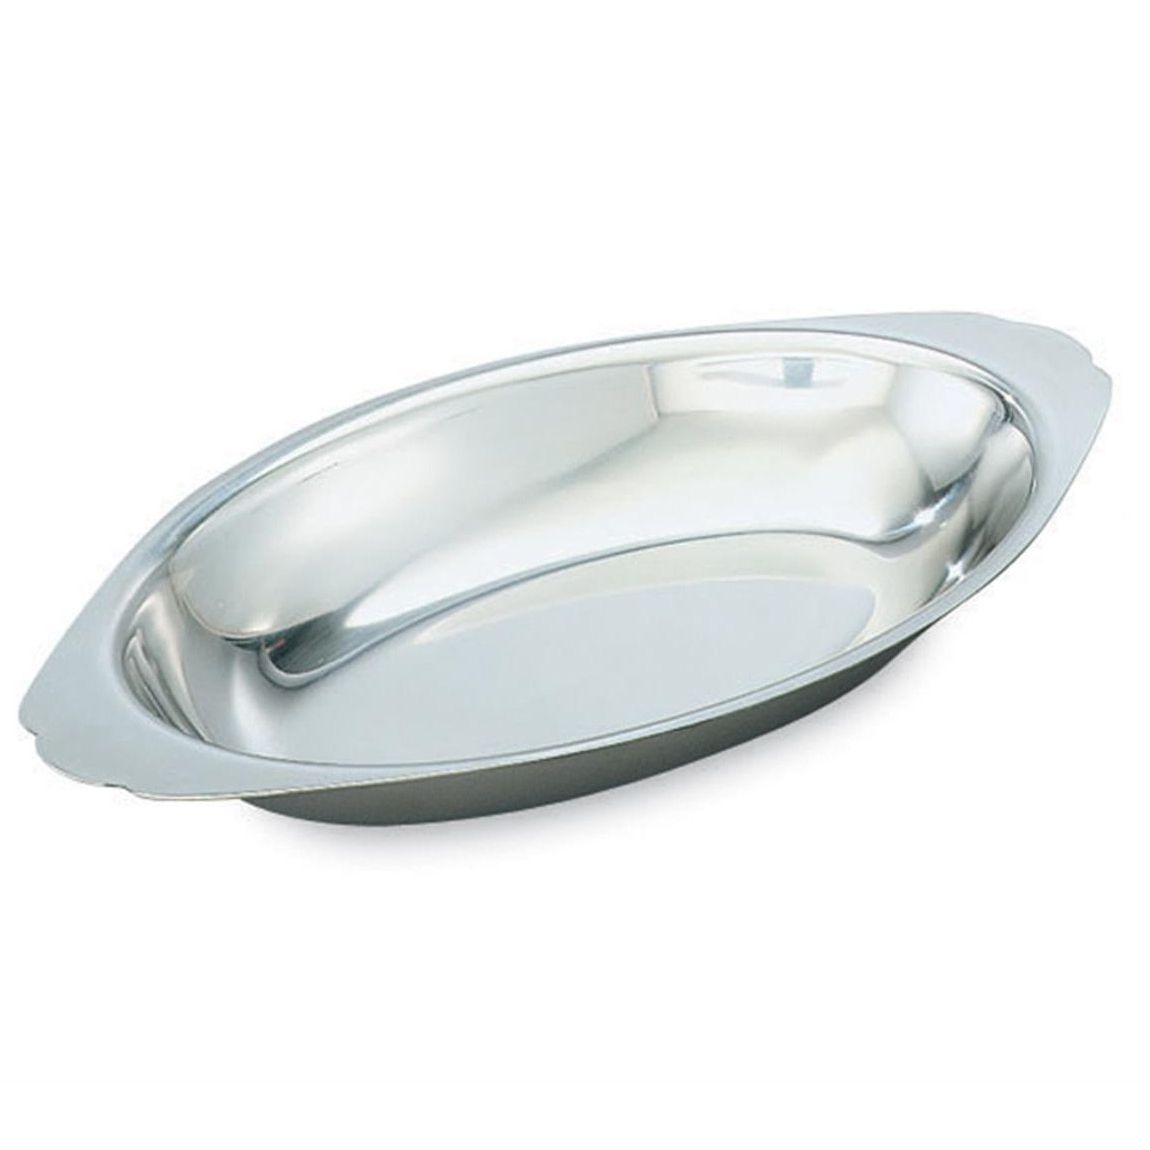 WinCo Ado-12 Stainless Steel Oval AU Gratin Dish 12-ounce for sale online 